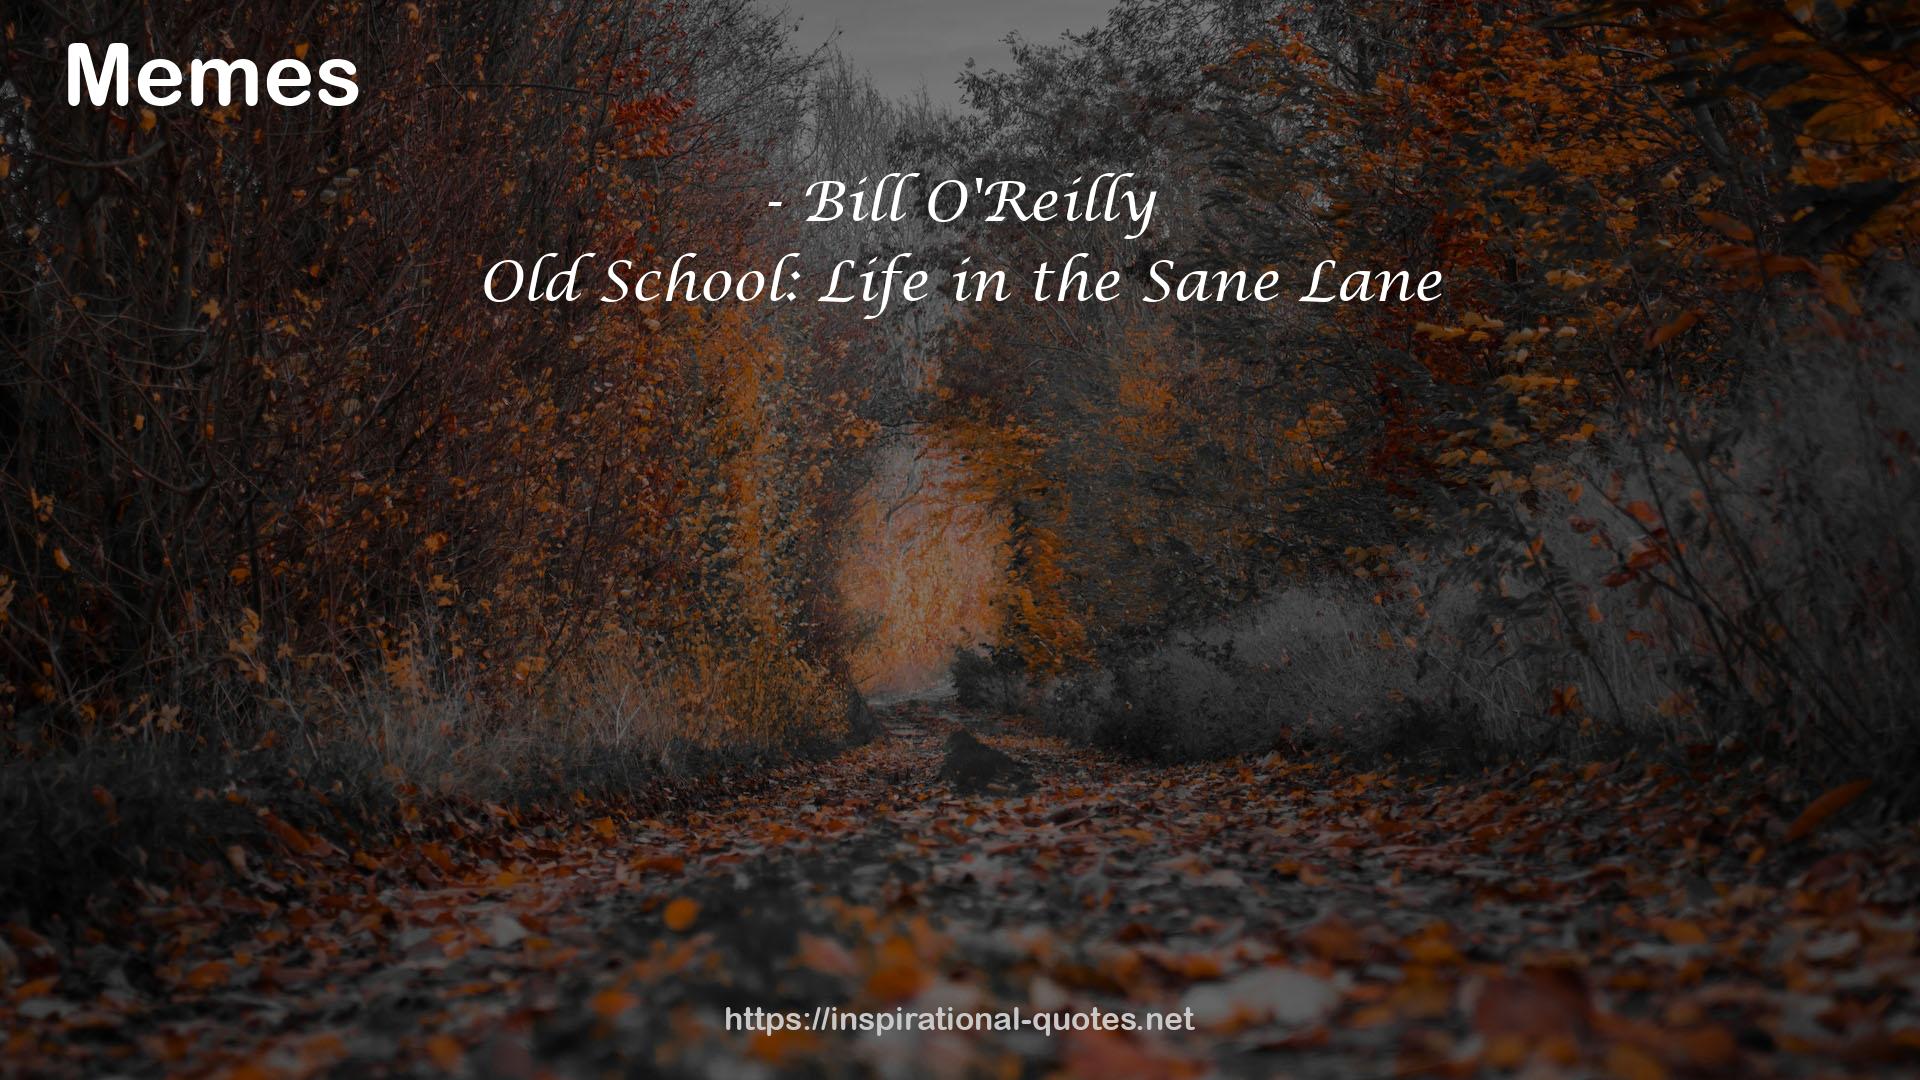 Old School: Life in the Sane Lane QUOTES